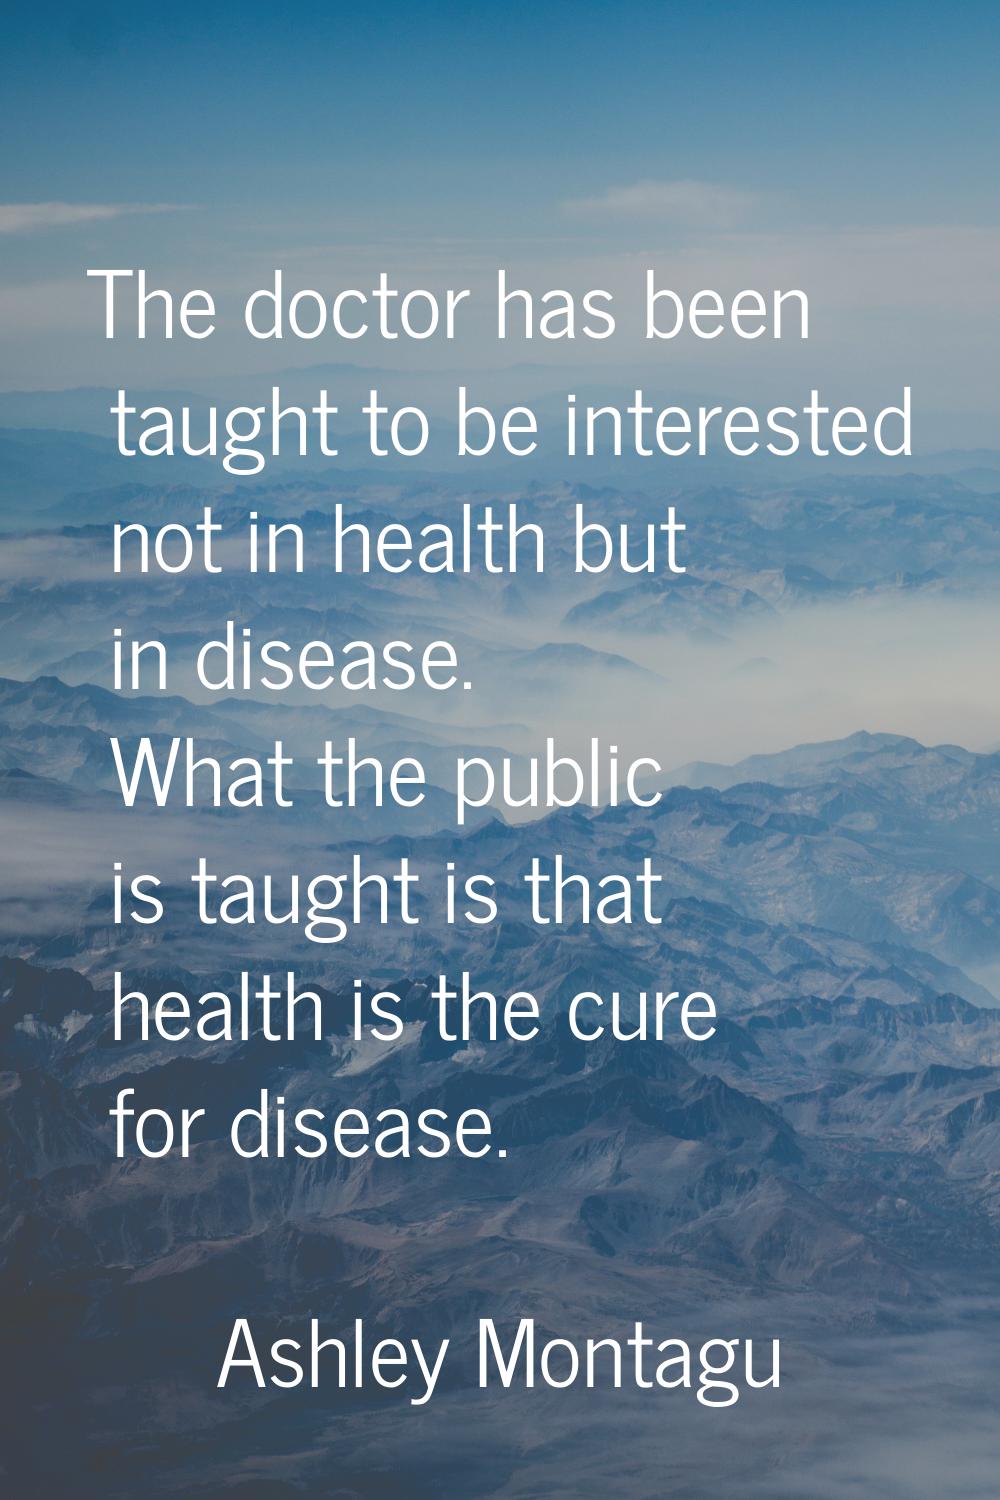 The doctor has been taught to be interested not in health but in disease. What the public is taught